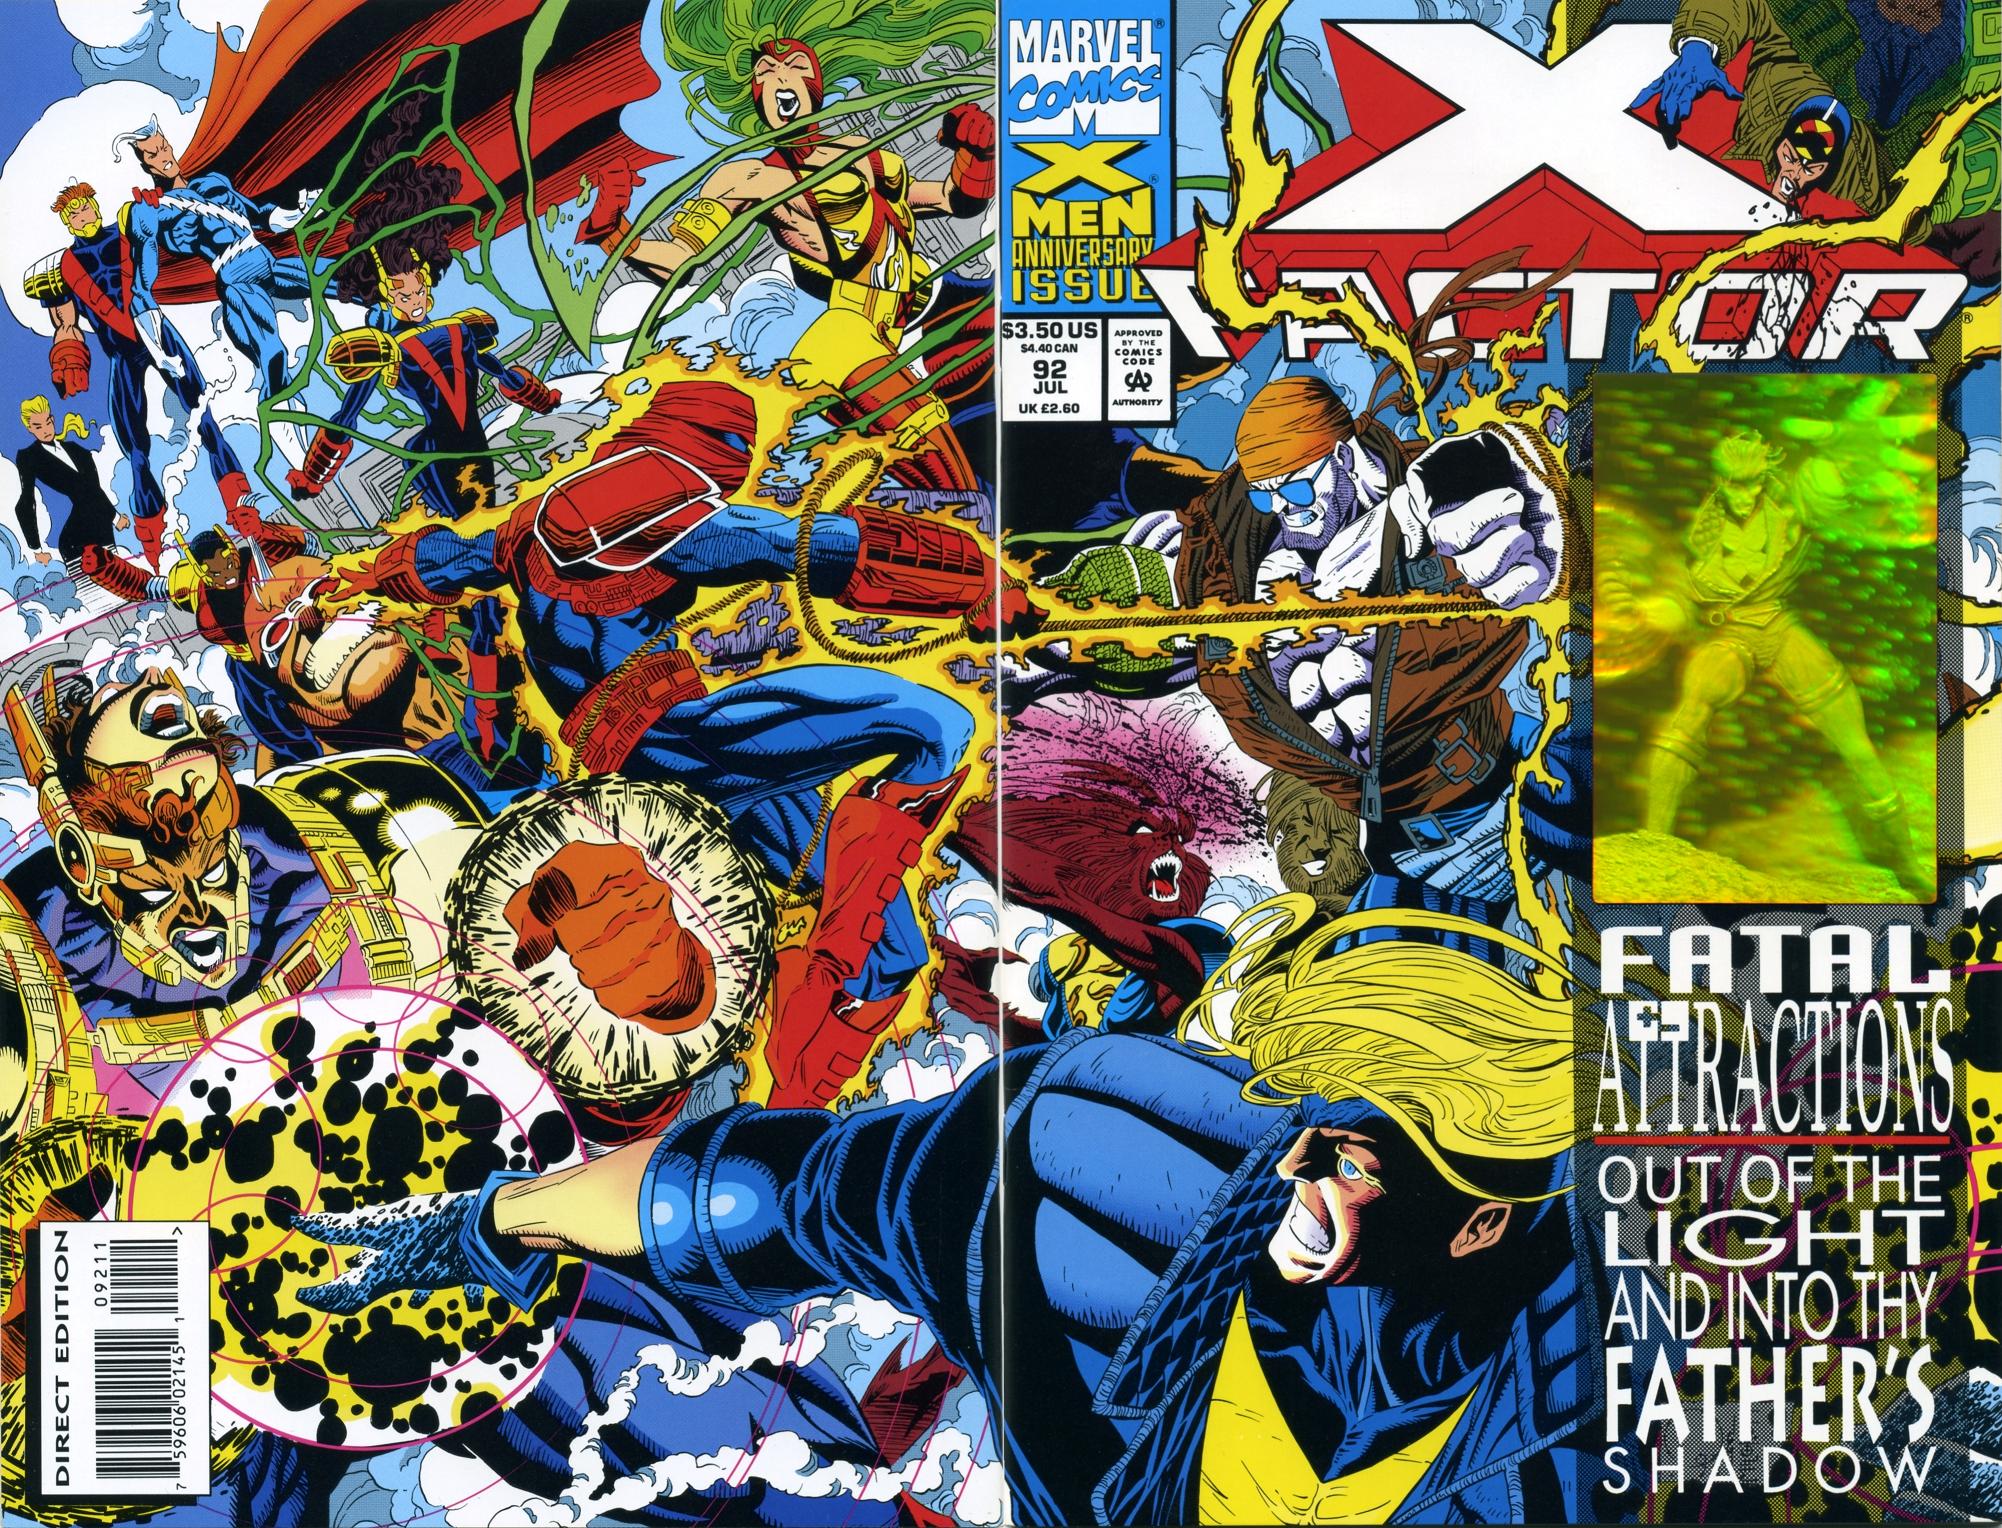 x-men-fatal-attractions-covers-and-holograms003.jpg